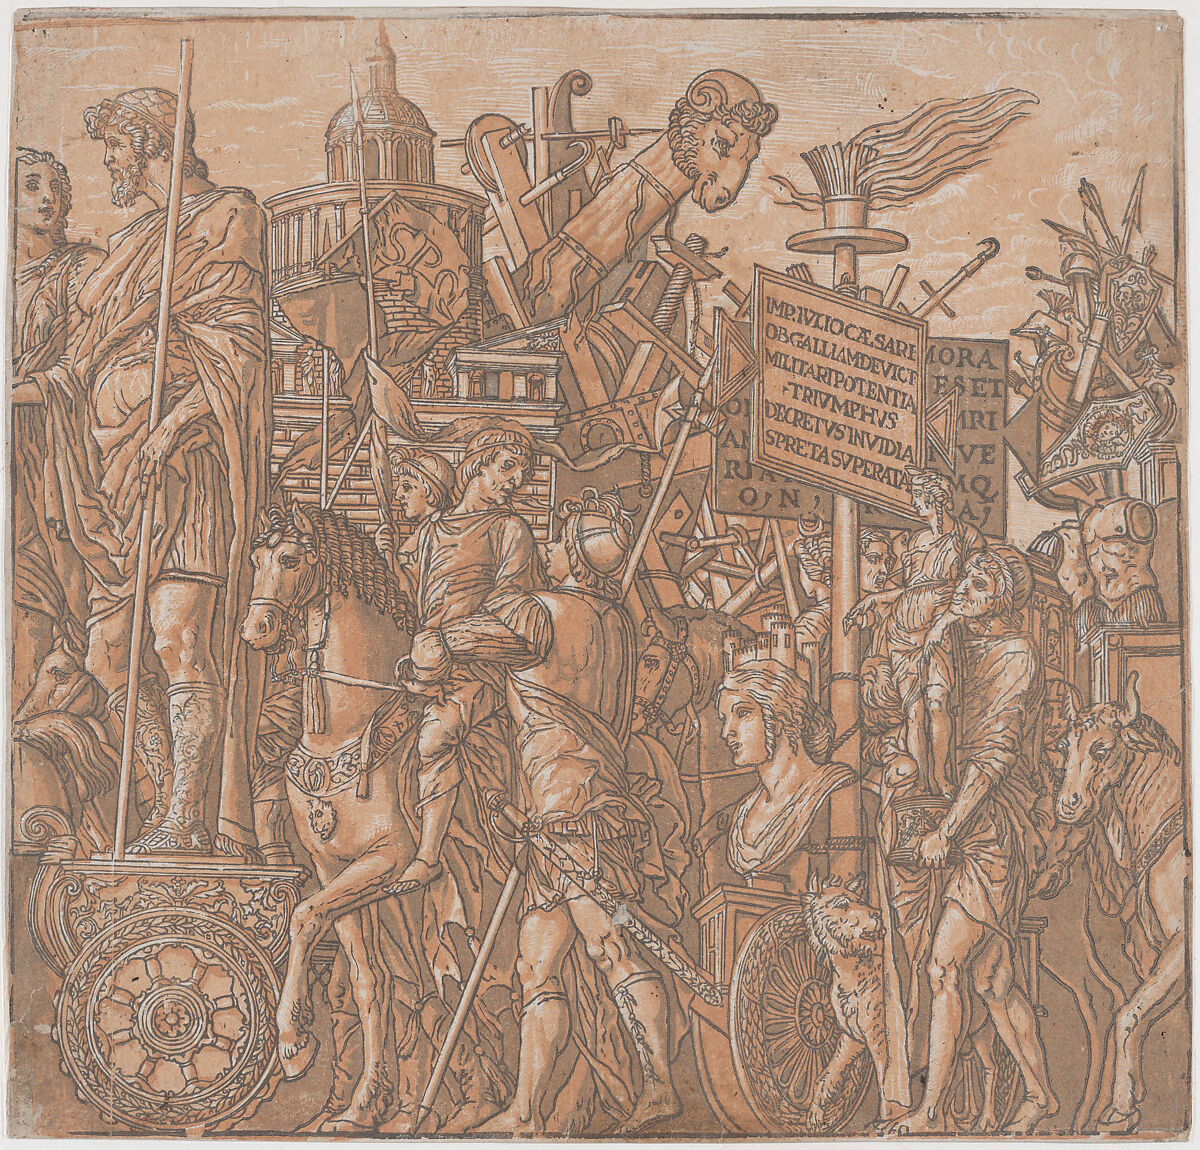 Sheet 2: A figure on a triumphal chariot surrounded by figures on horseback, from "The Triumph of Julius Caesar", Andrea Andreani (Italian, Mantua 1558/1559–1629), Chiaroscuro woodcut from four blocks printed in pink 